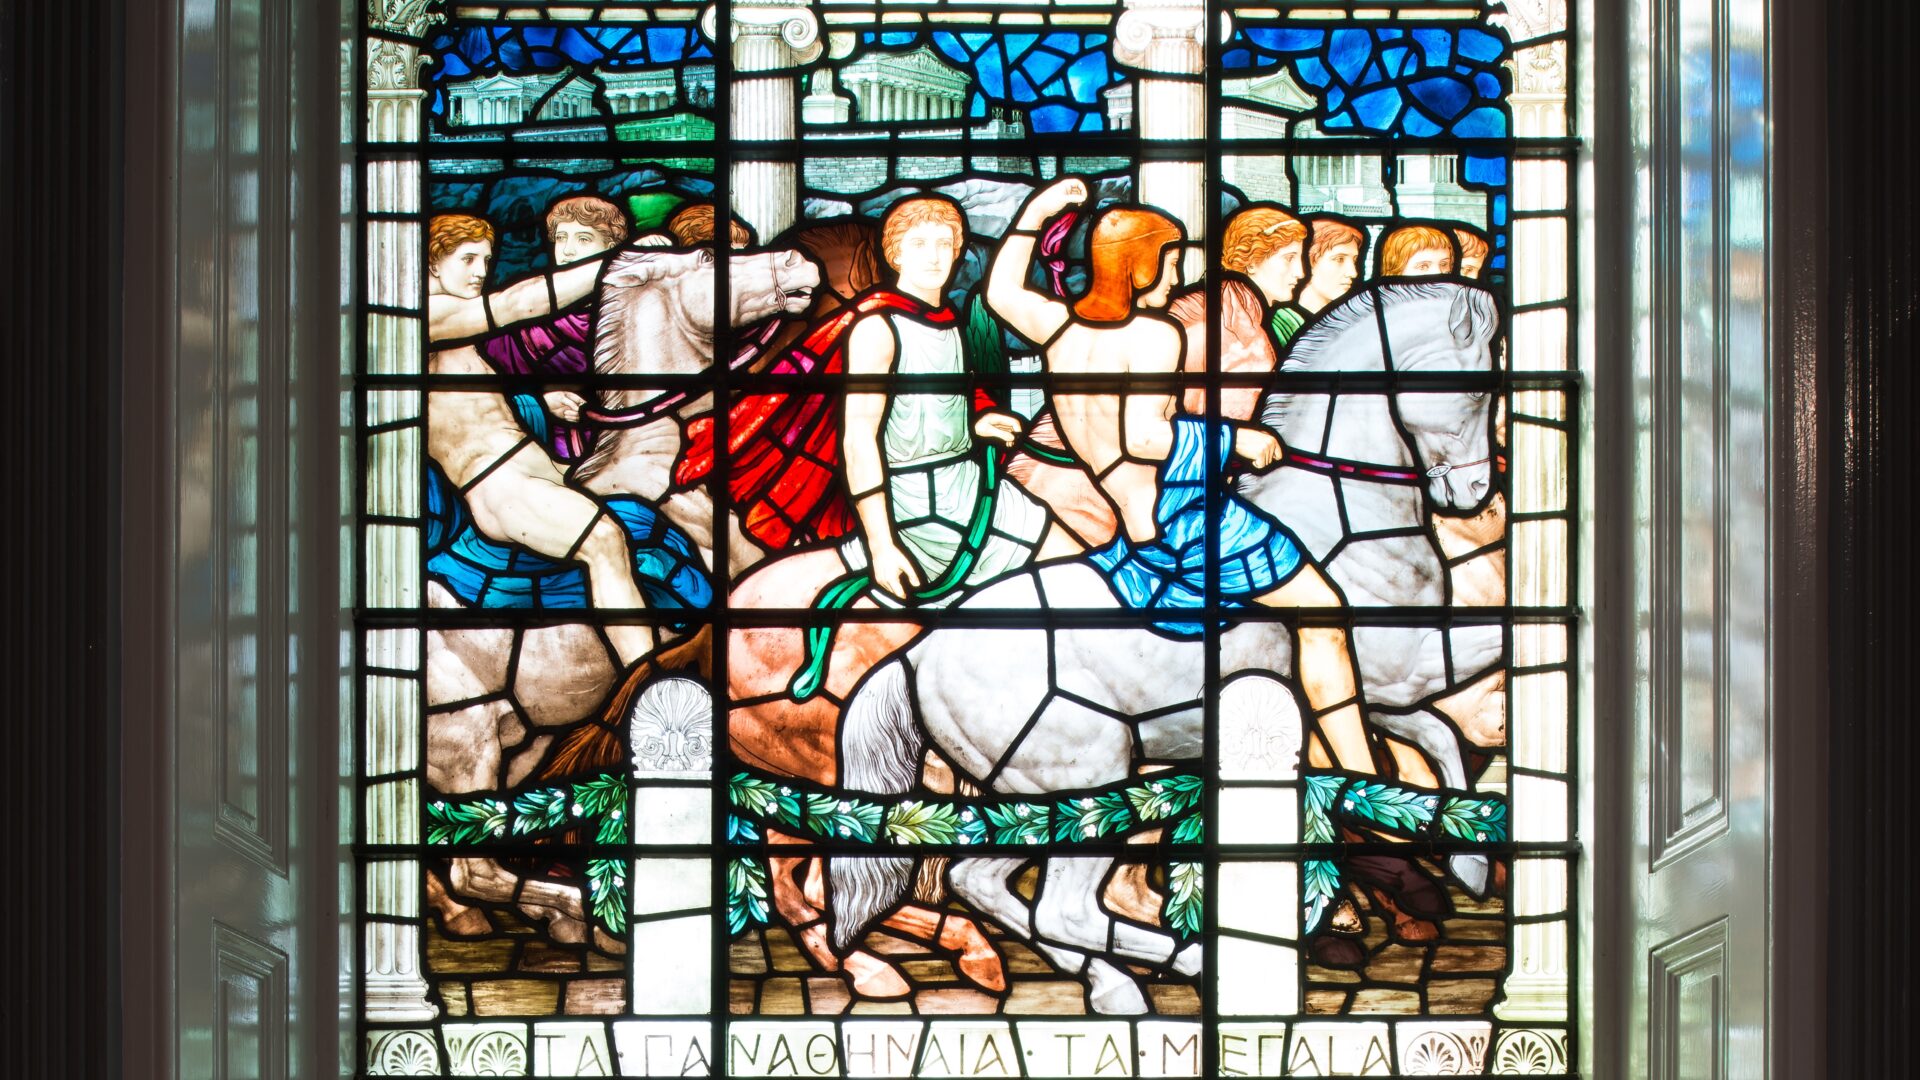 Image of a stained glass window.